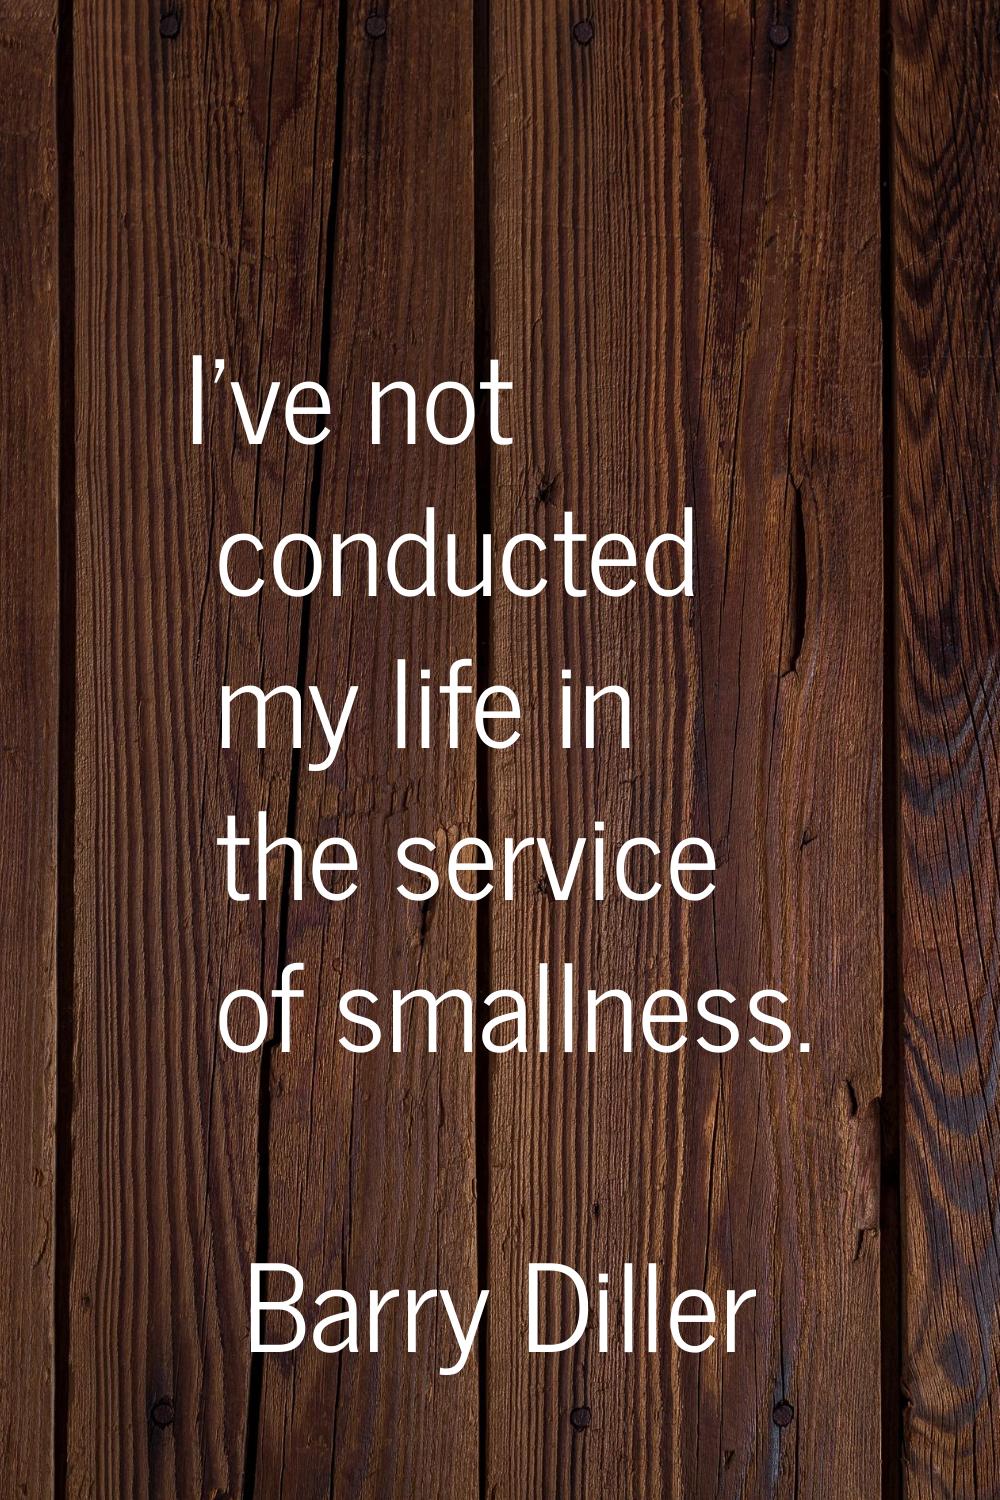 I've not conducted my life in the service of smallness.